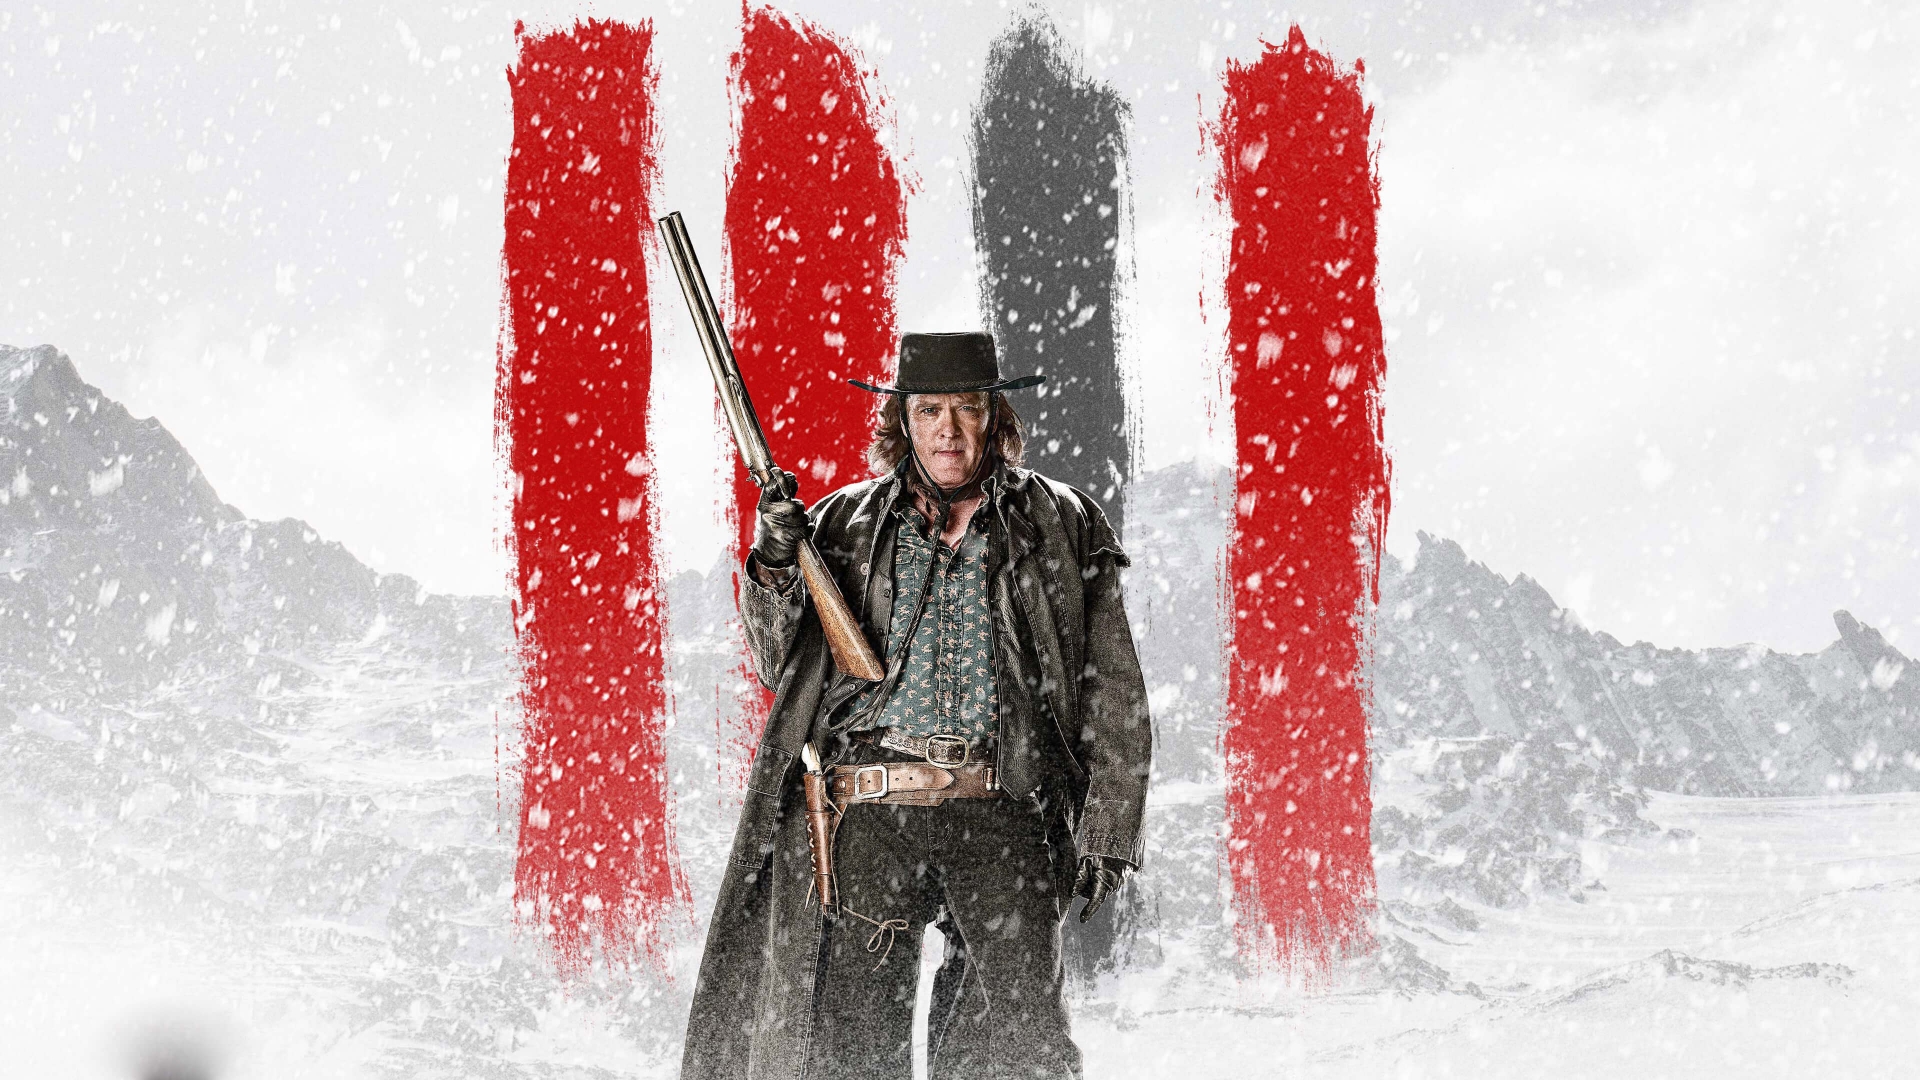 The Hateful Eight Michael Madsen for 1920 x 1080 HDTV 1080p resolution